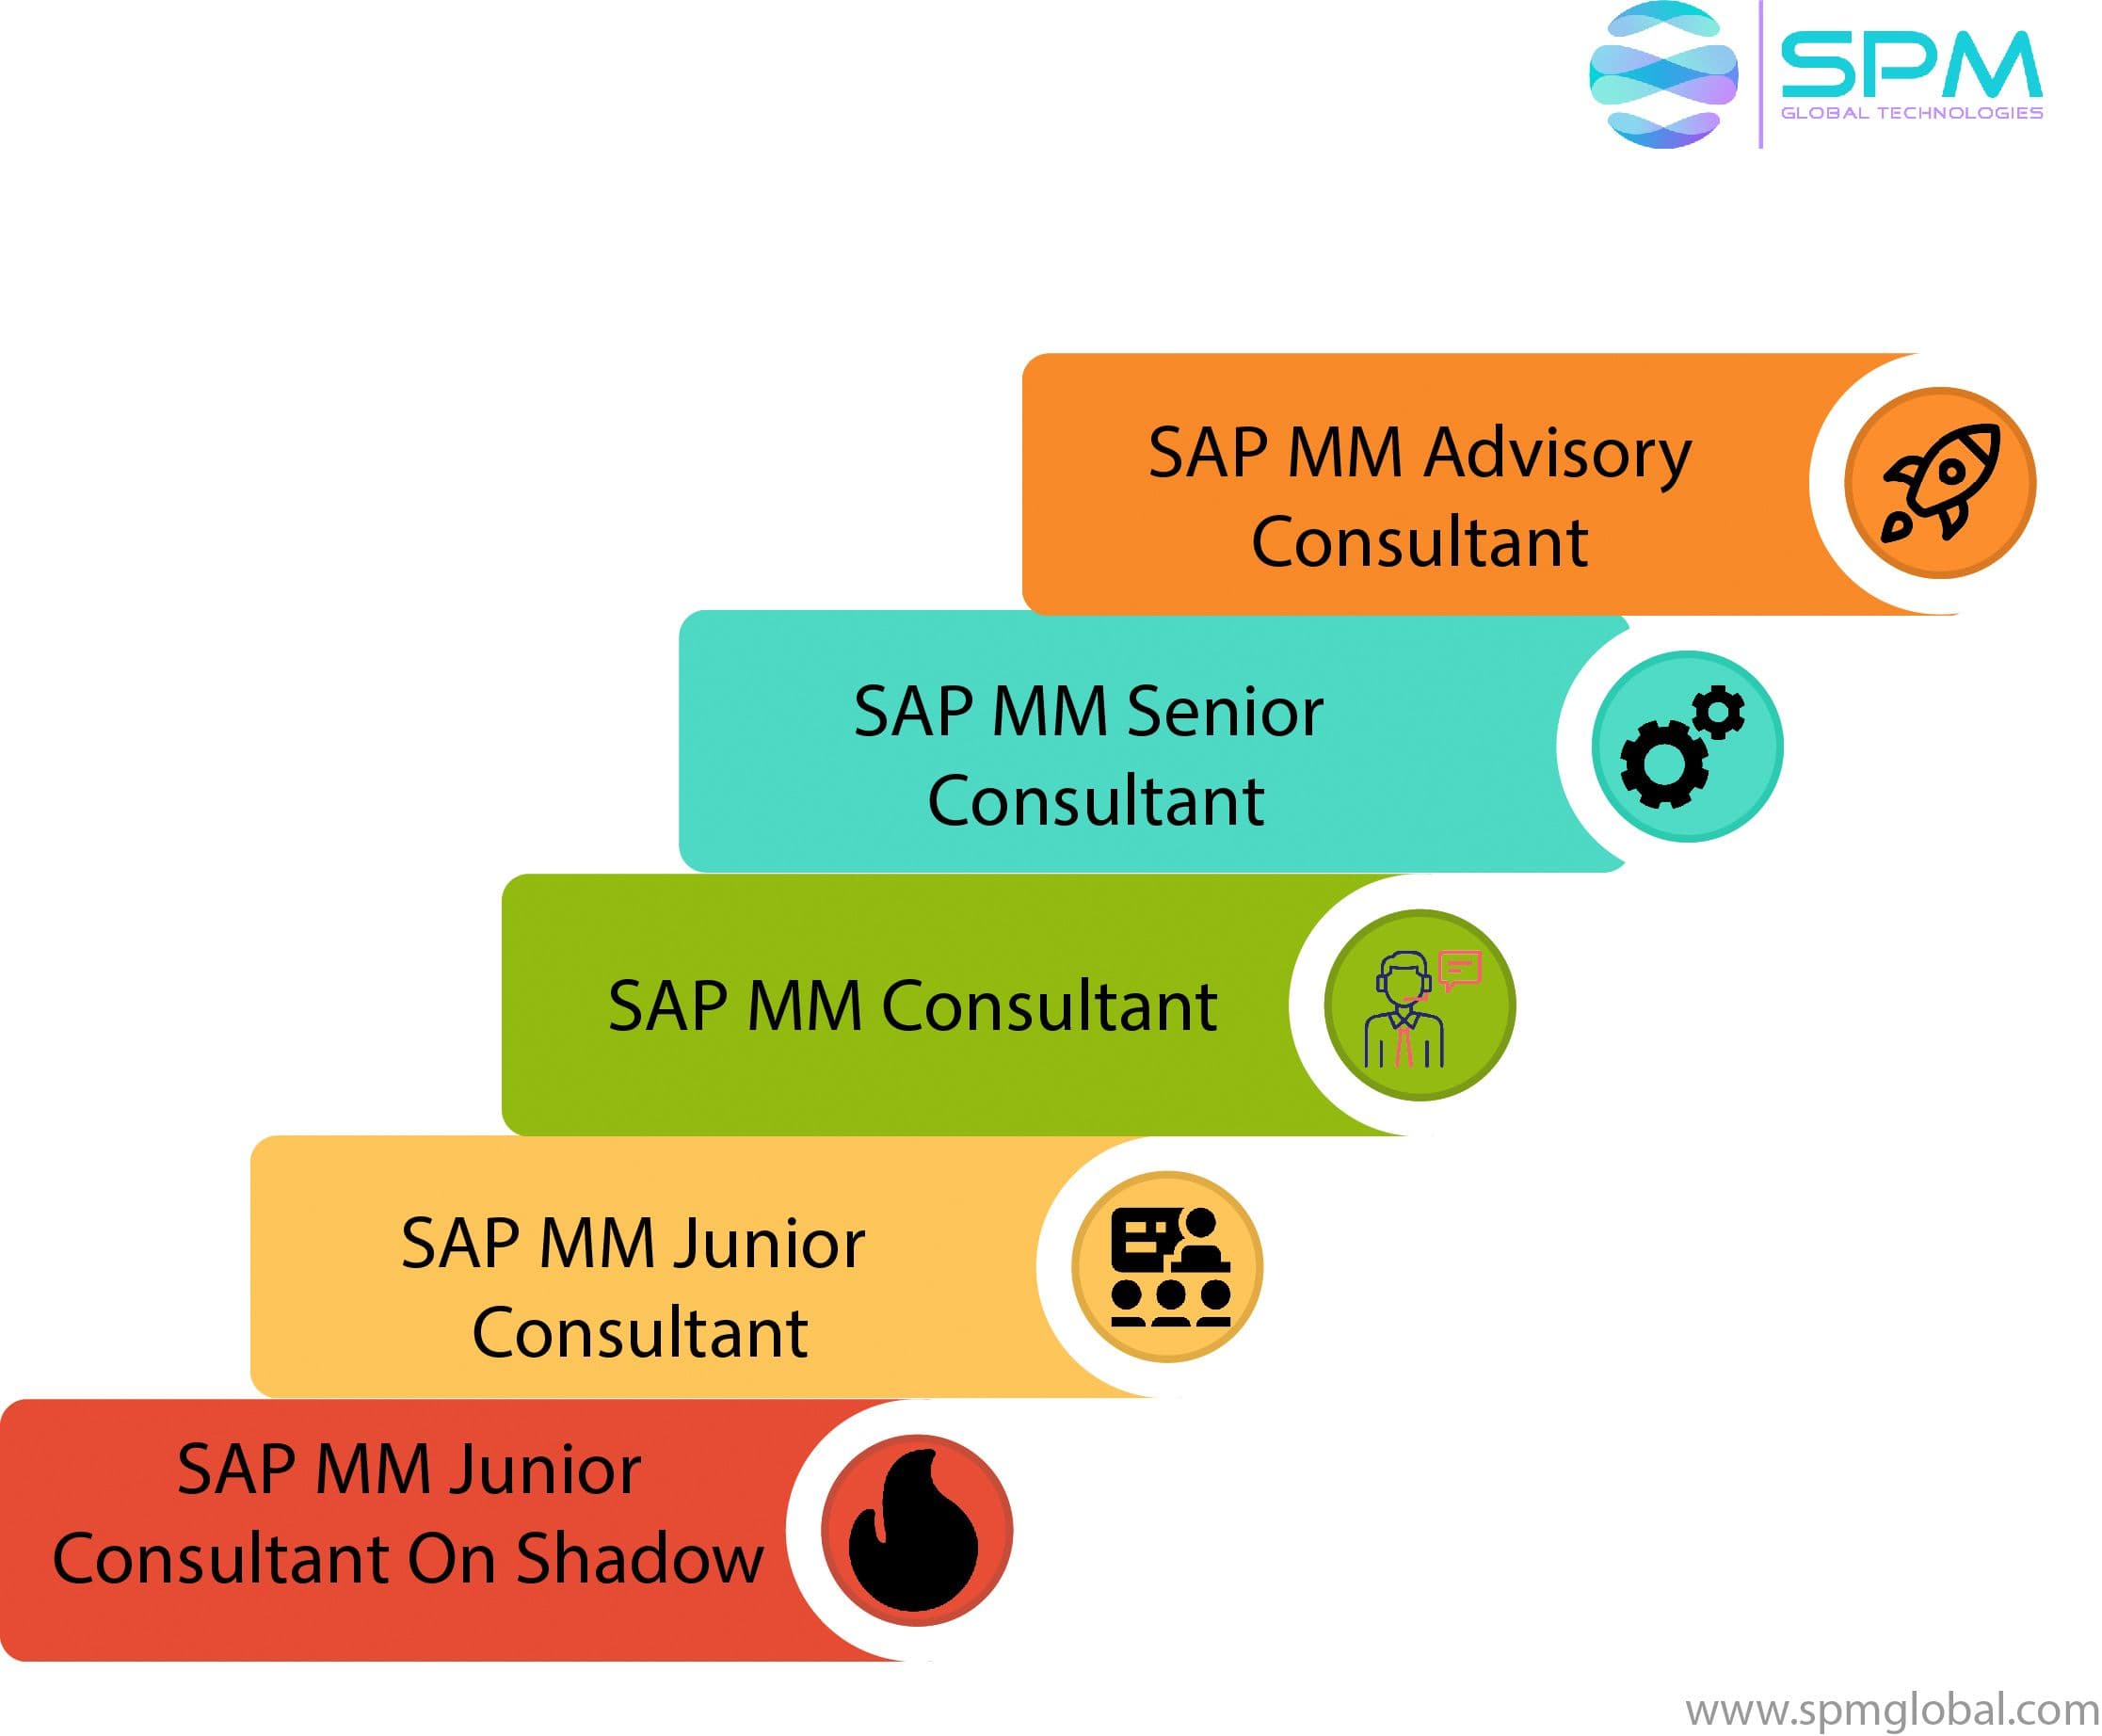 SAP-based solutions